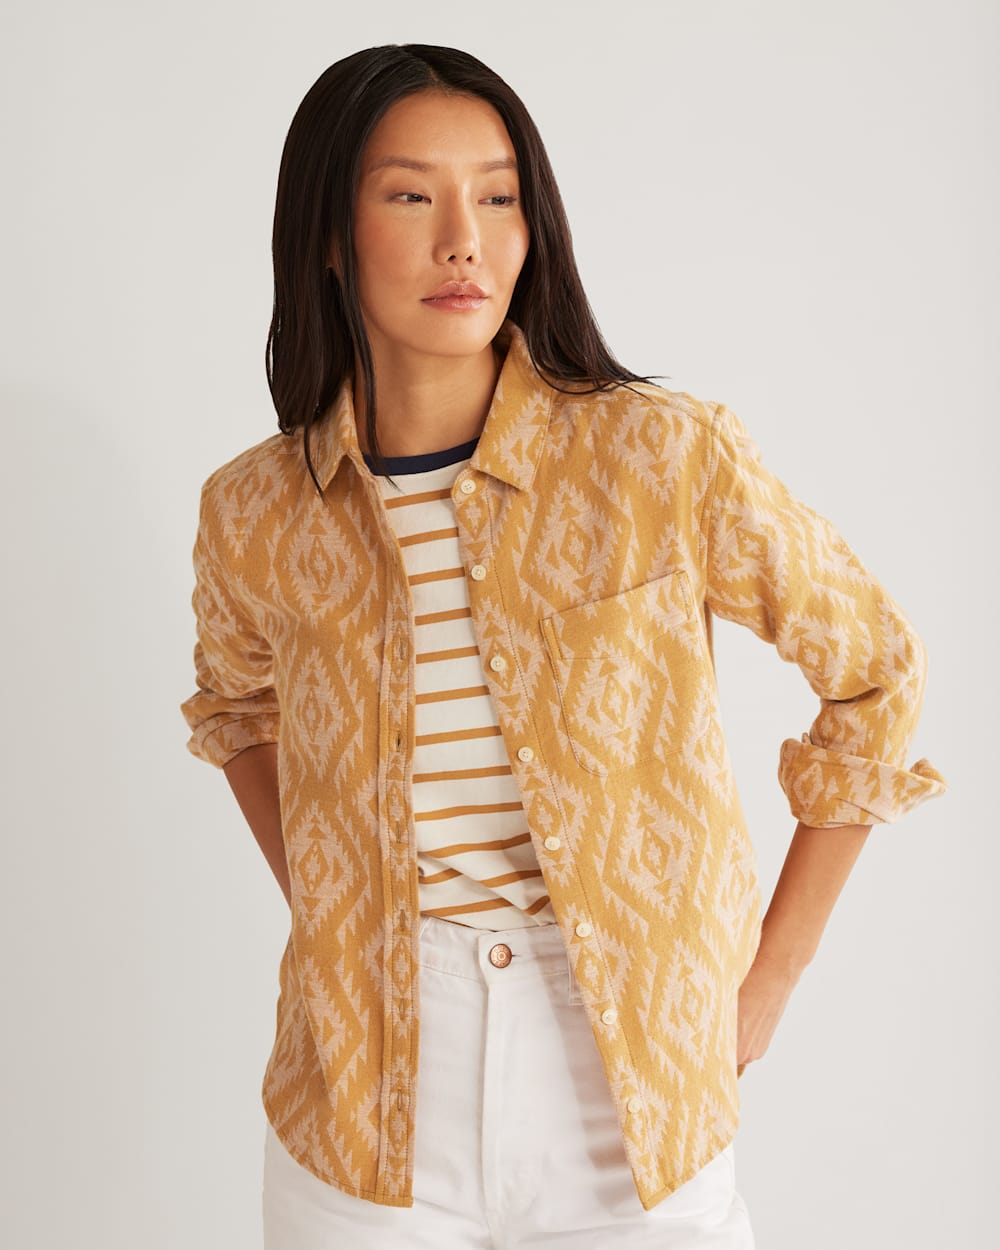 ALTERNATE VIEW OF WOMEN'S DOUBLESOFT LONG BEACH SHIRT IN CURRY/BROWN SUGAR image number 3